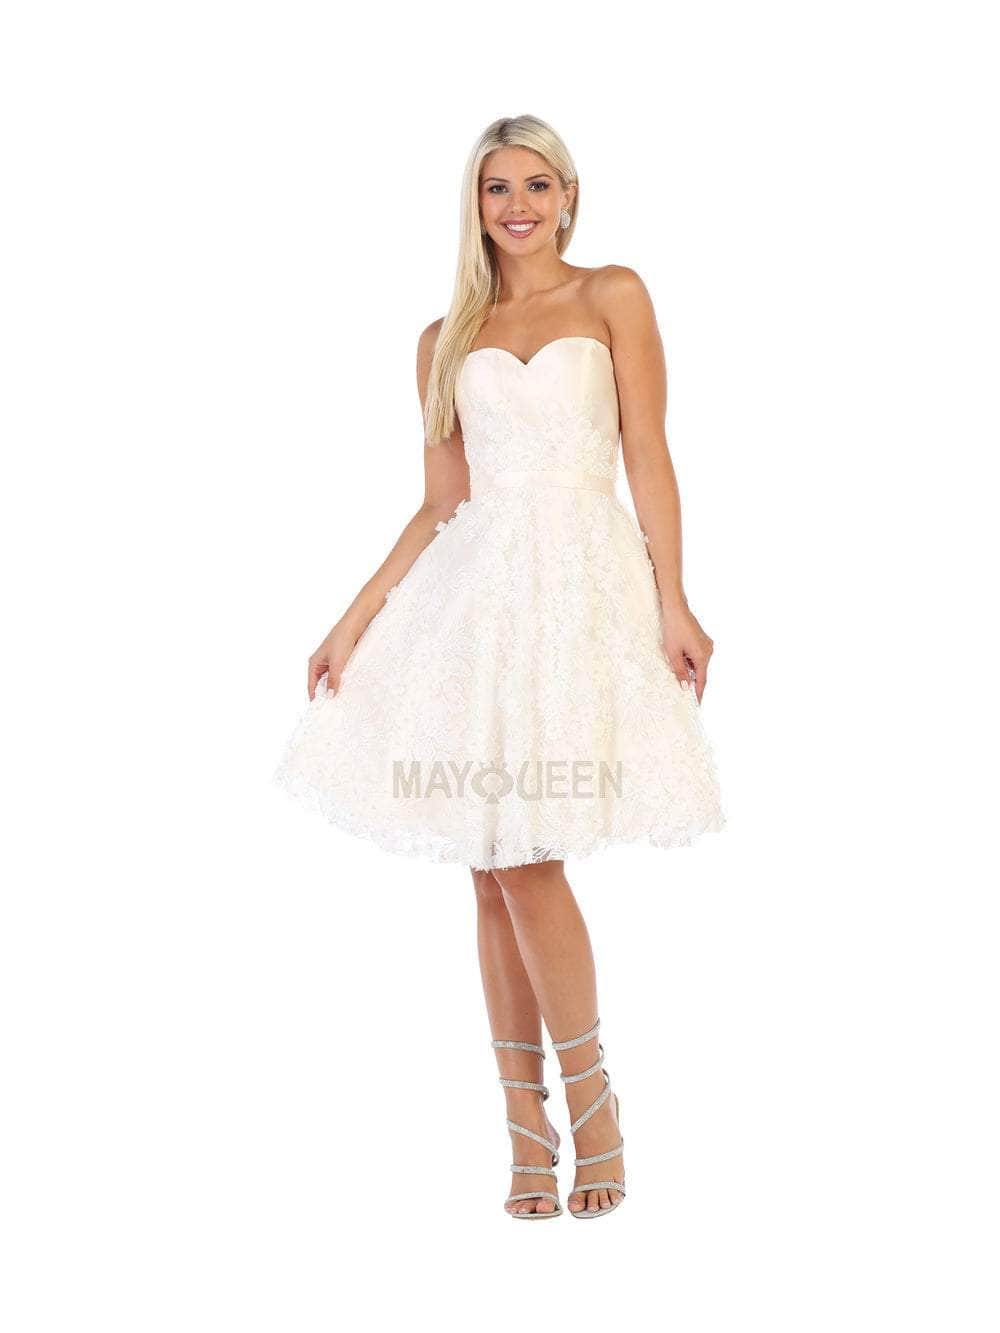 May Queen MQ1613 - Strapless Embroidered Cocktail Dress Special Occasion Dress